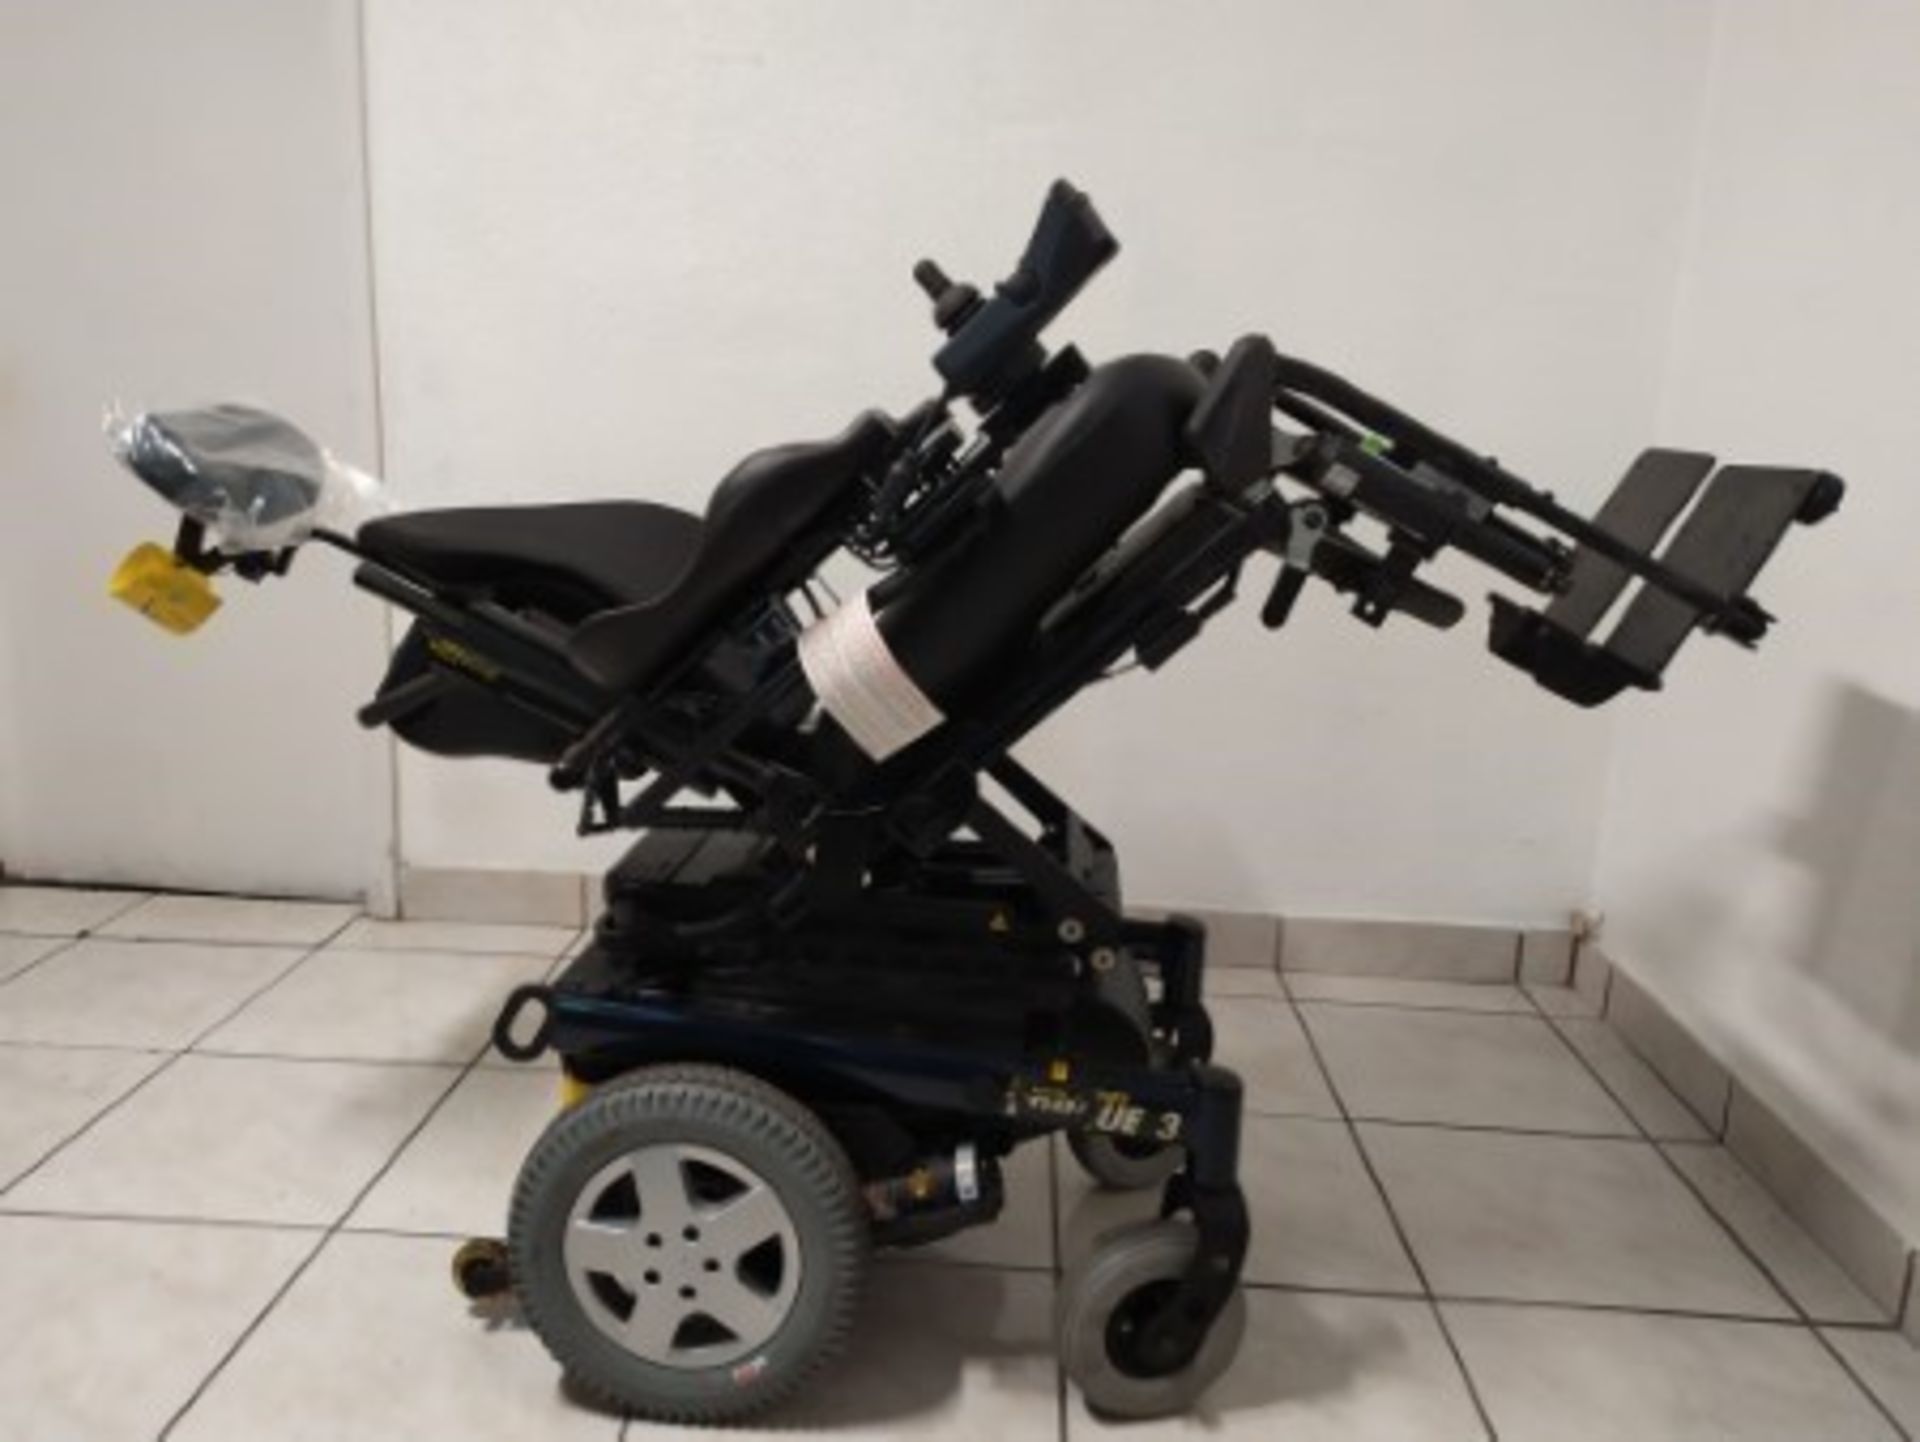 2014 INVACARE ATO-36TO3-MCG 6-WHEEL REHAB POWER CHAIR WITH JOYSTICK CONTROL, KEYBOARD, RECLINING SEA - Image 7 of 9